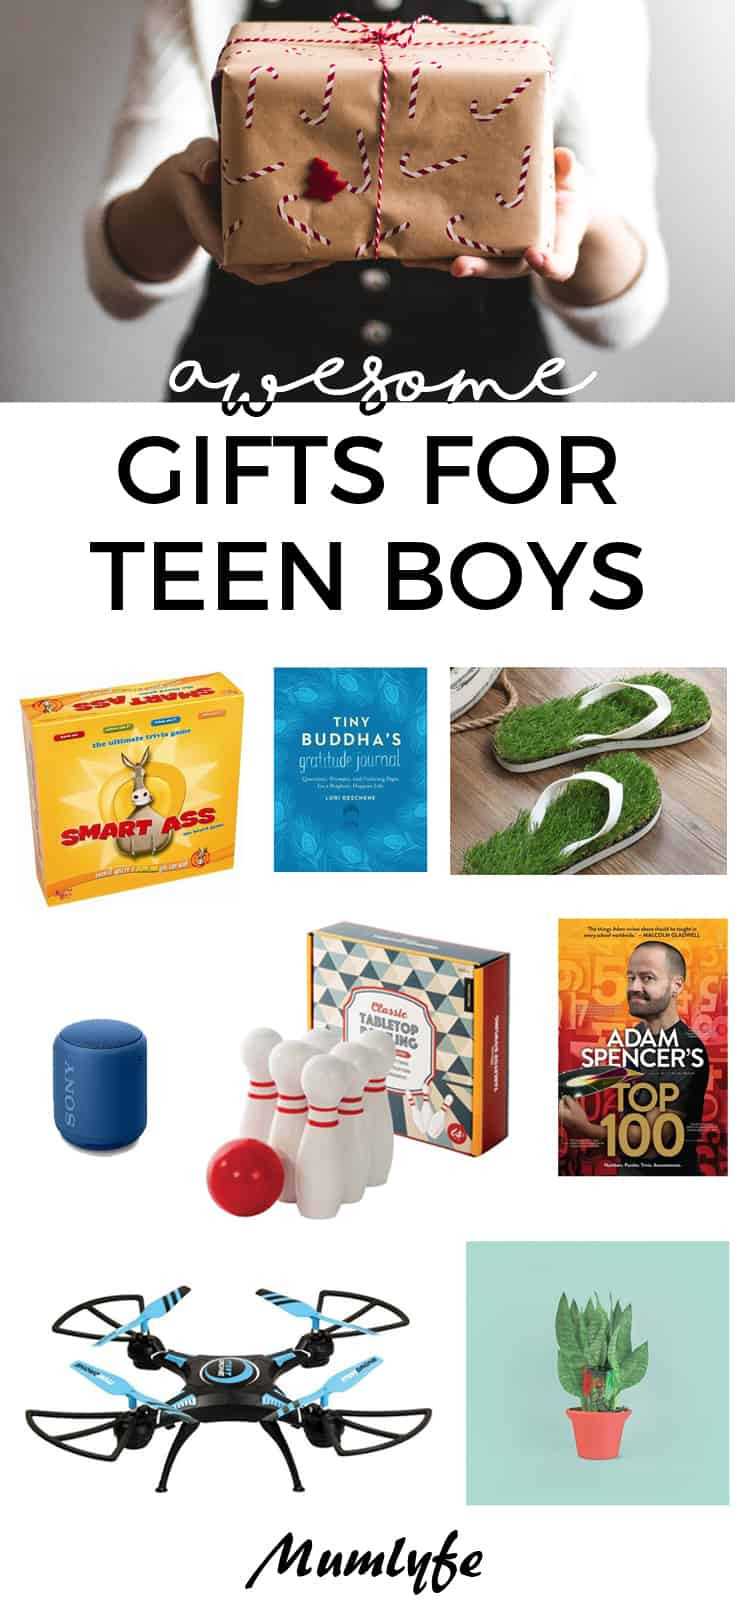 Gift Ideas For Teenager Boys
 Awesome t ideas for teen boys they will love anything